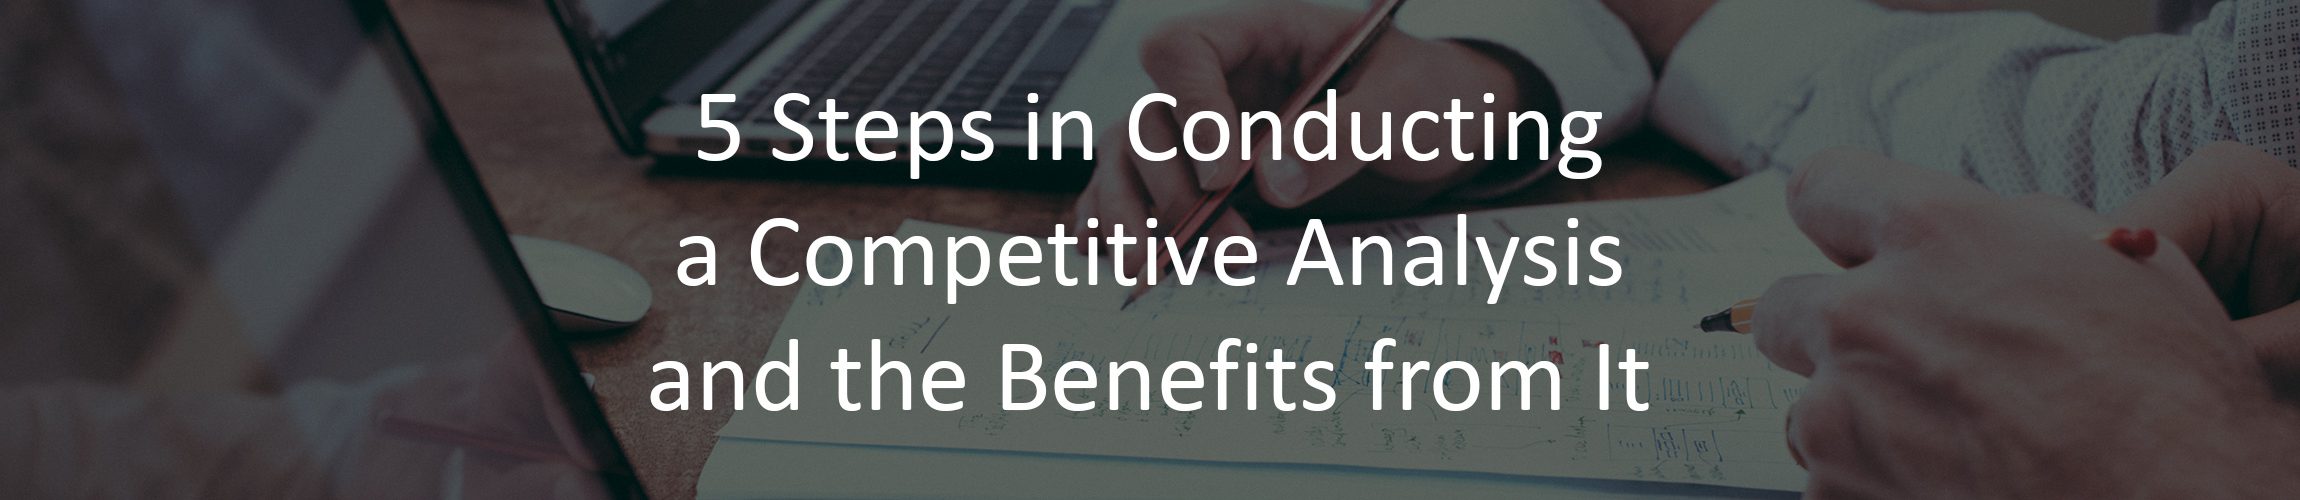 5 Steps in Conducting a Competitive Analysis and the Benefits from It